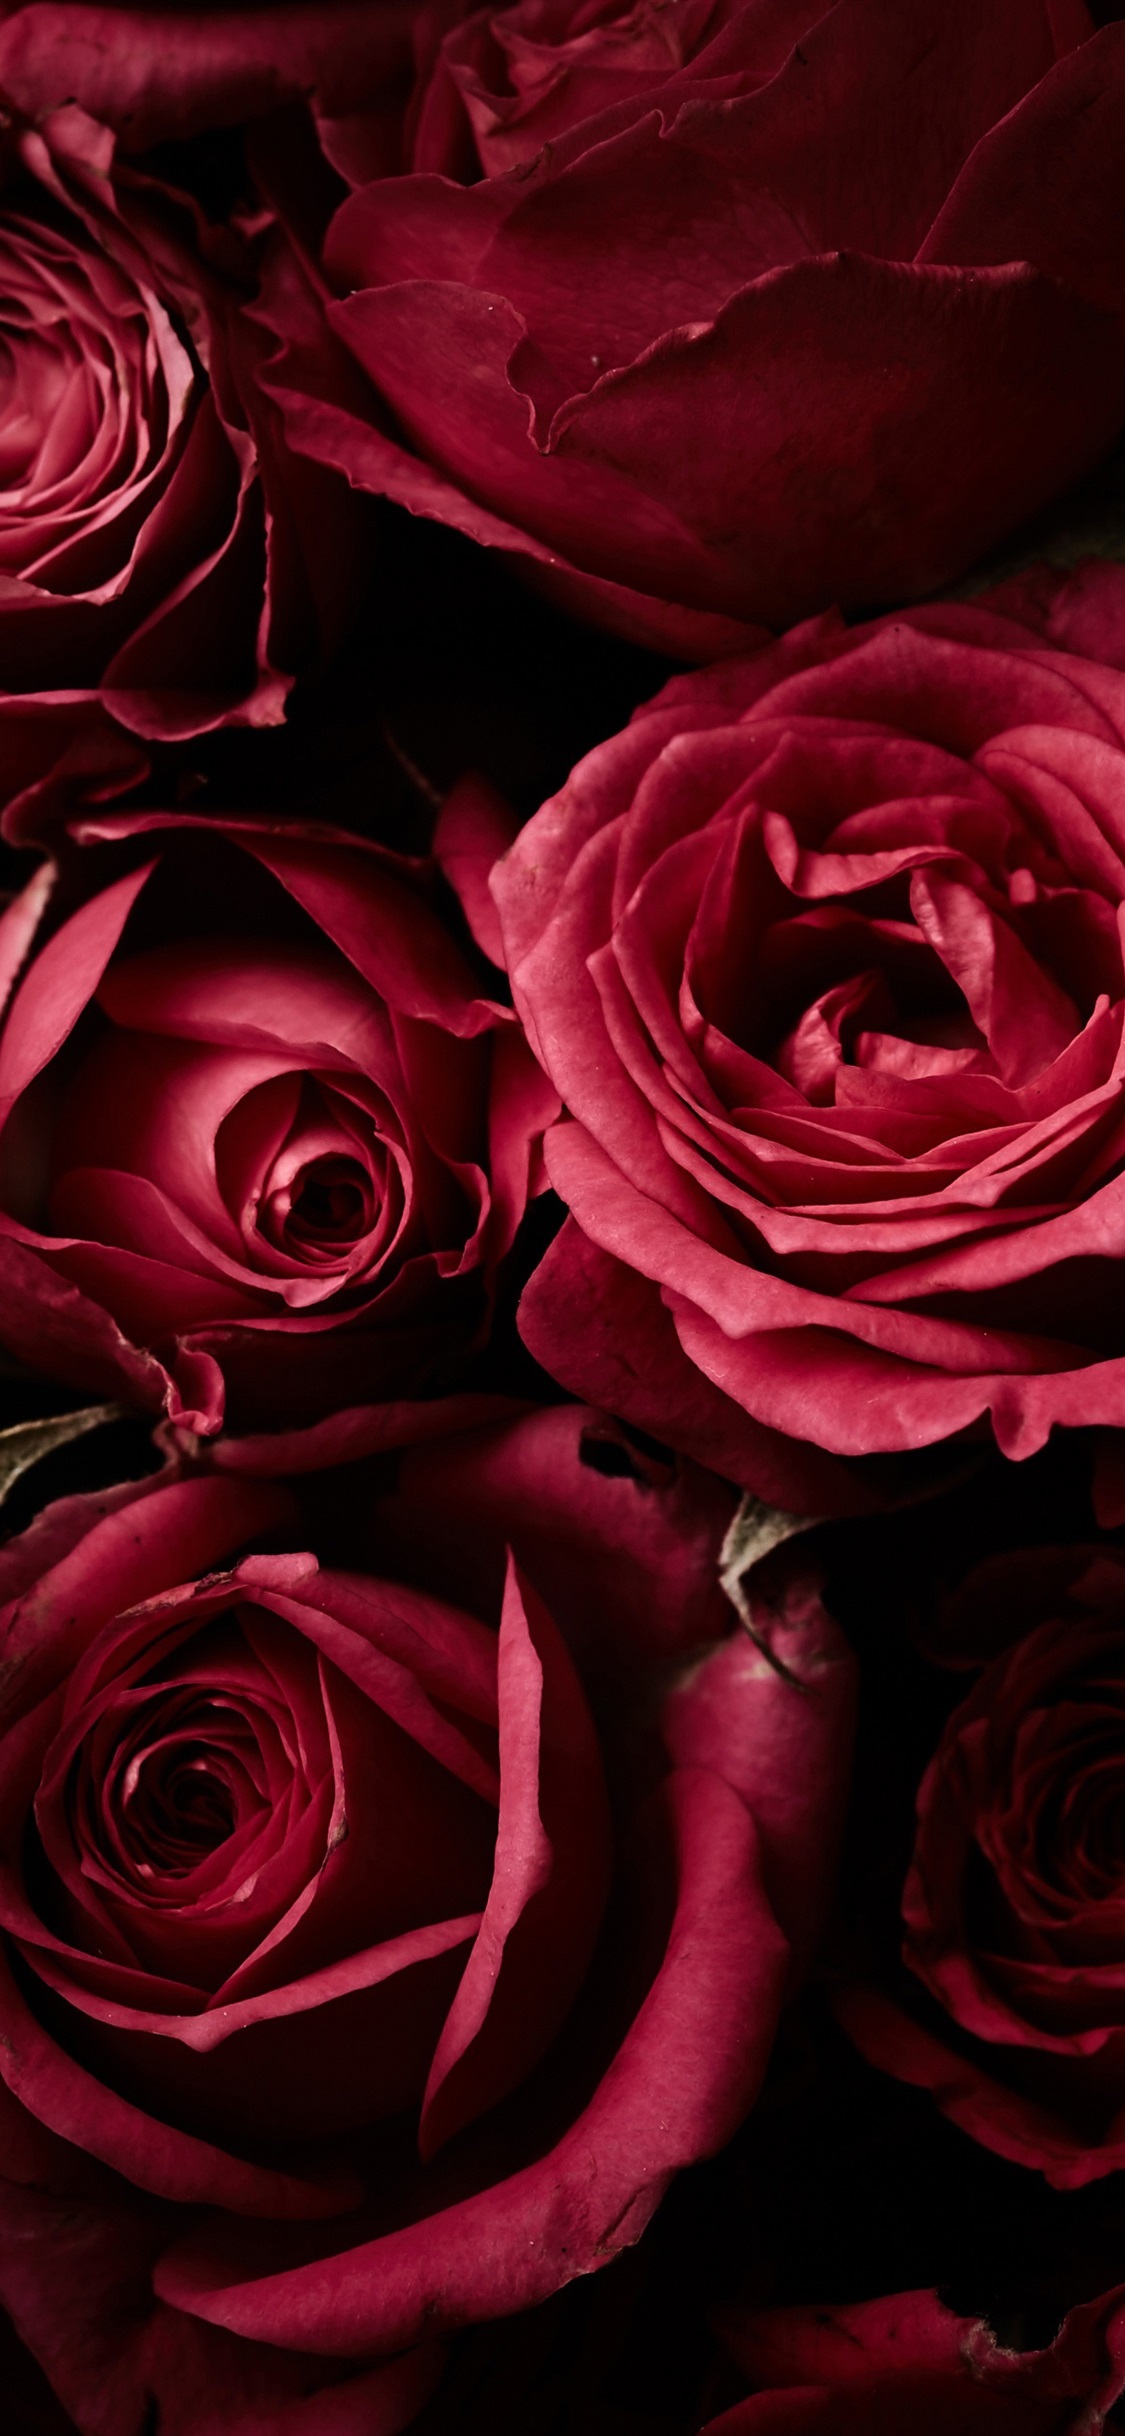 Iphone Wallpaper Red Roses Background - Flowers Of Love - HD Wallpaper 